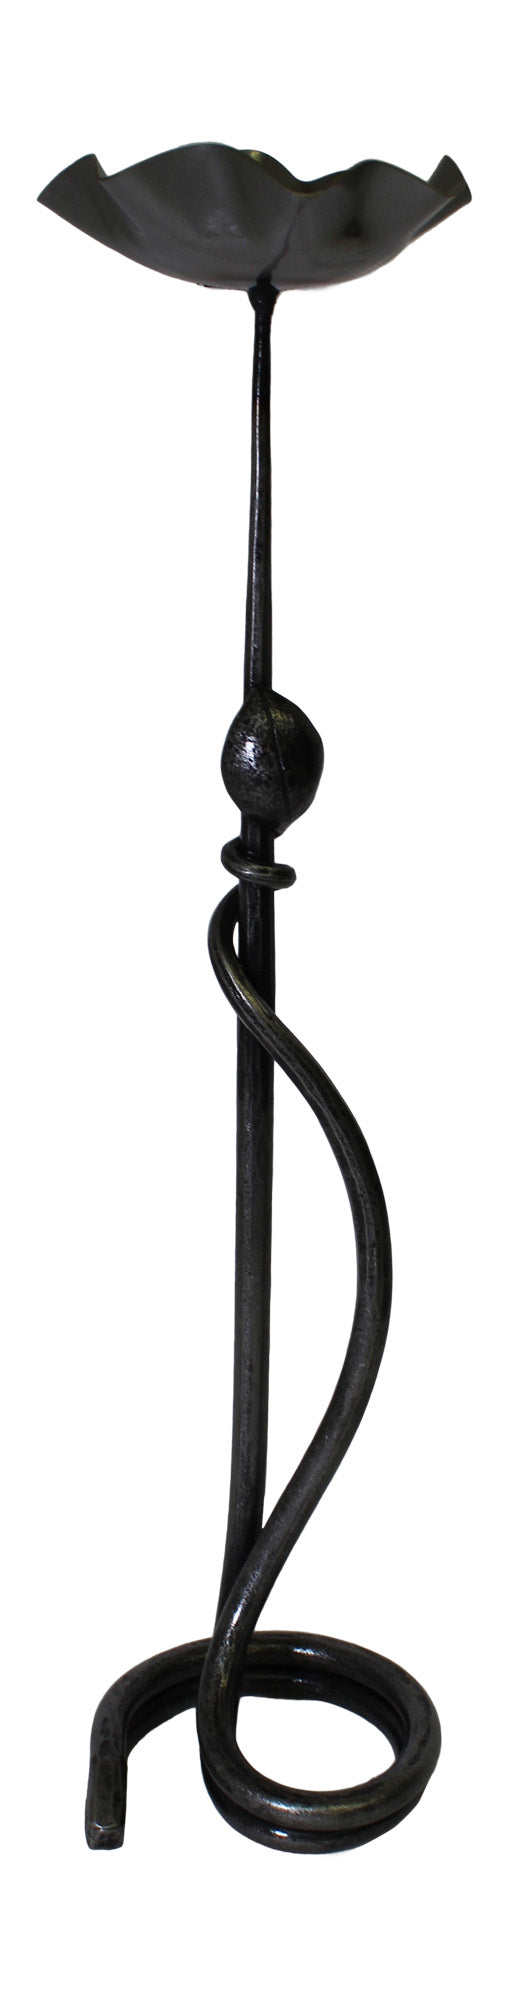 Iron Double Round With Leaf Candle Holder